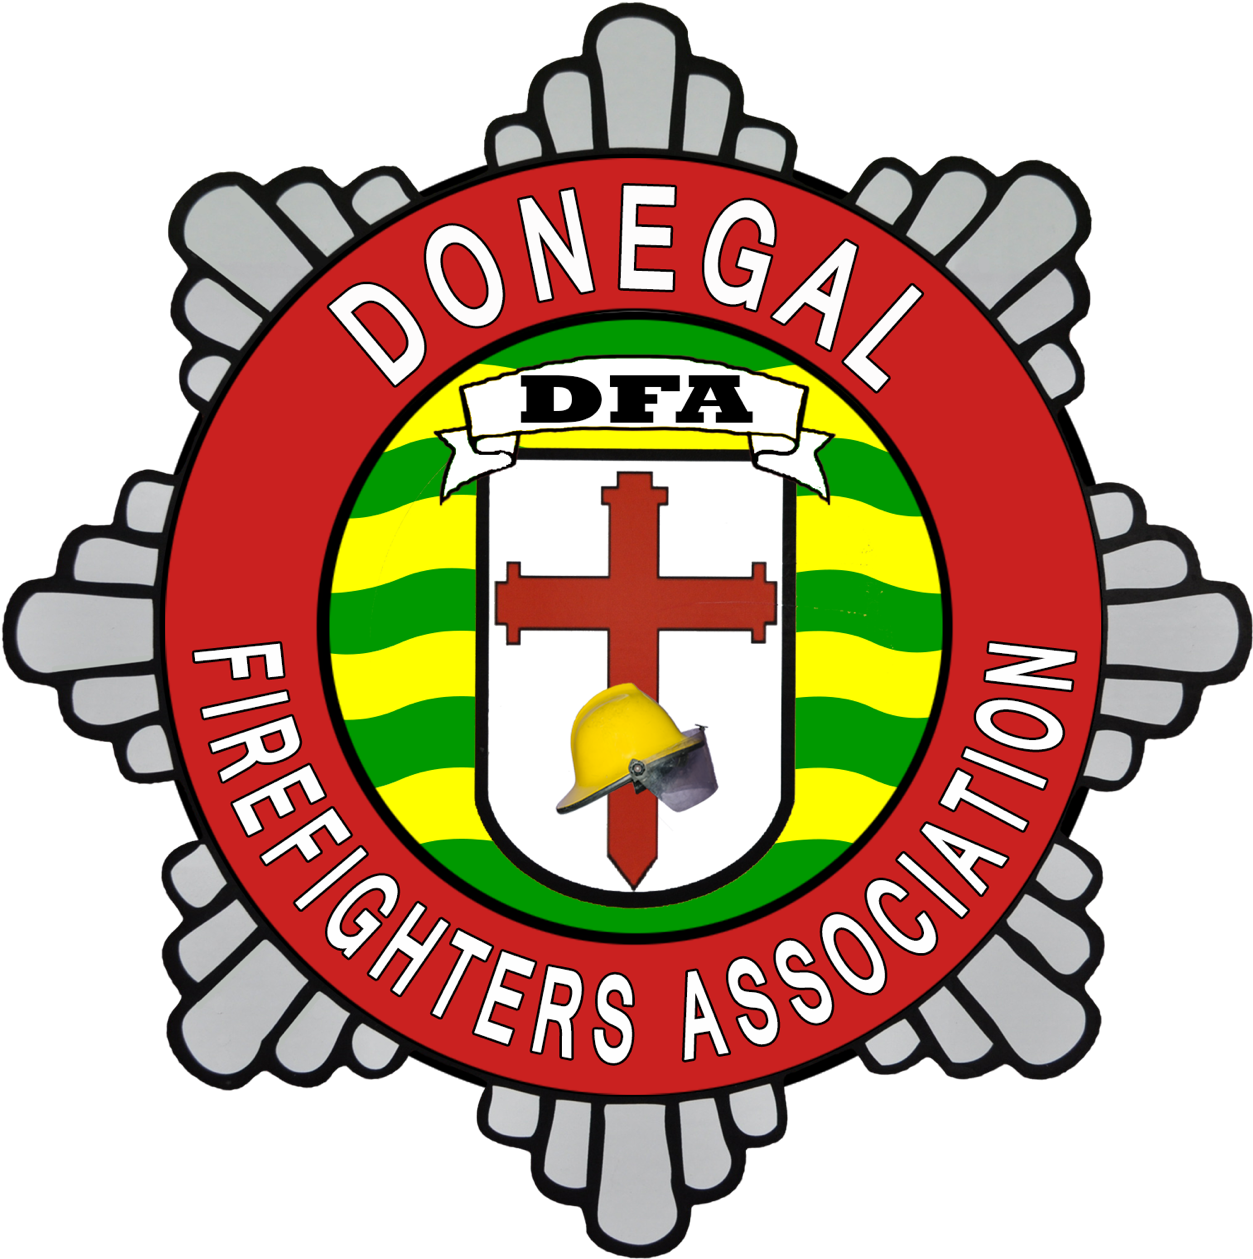 Donegal Firefighters Association Badge - Firefighter (1266x1280)